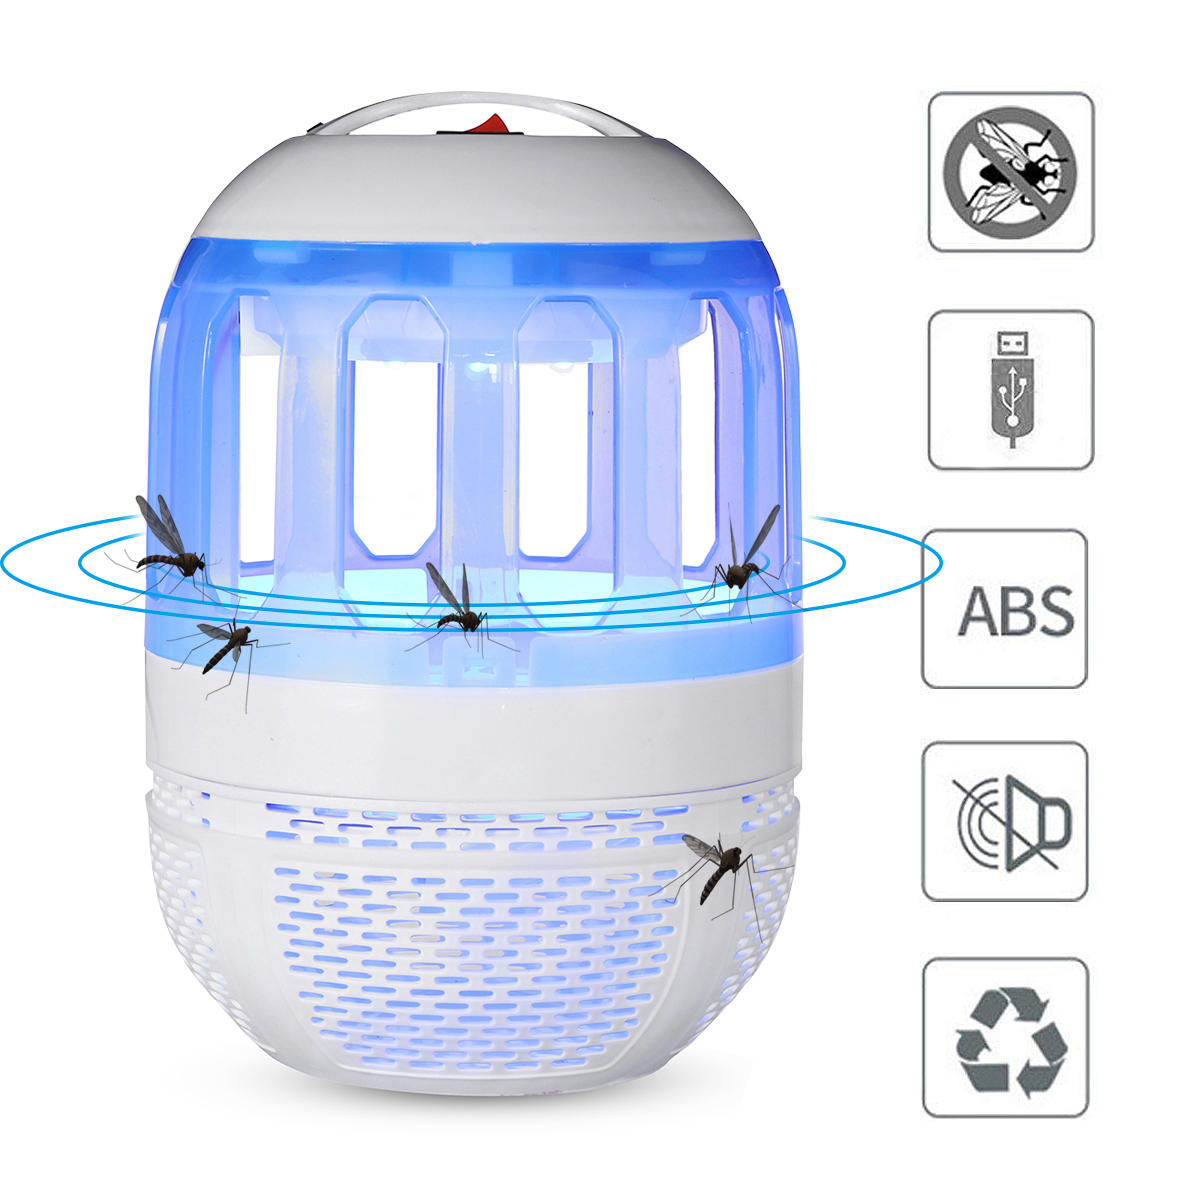 2W Electronic Mosquito Killer Lamp USB Insect Killer Lamp Bulb Pest Trap Light For Camping